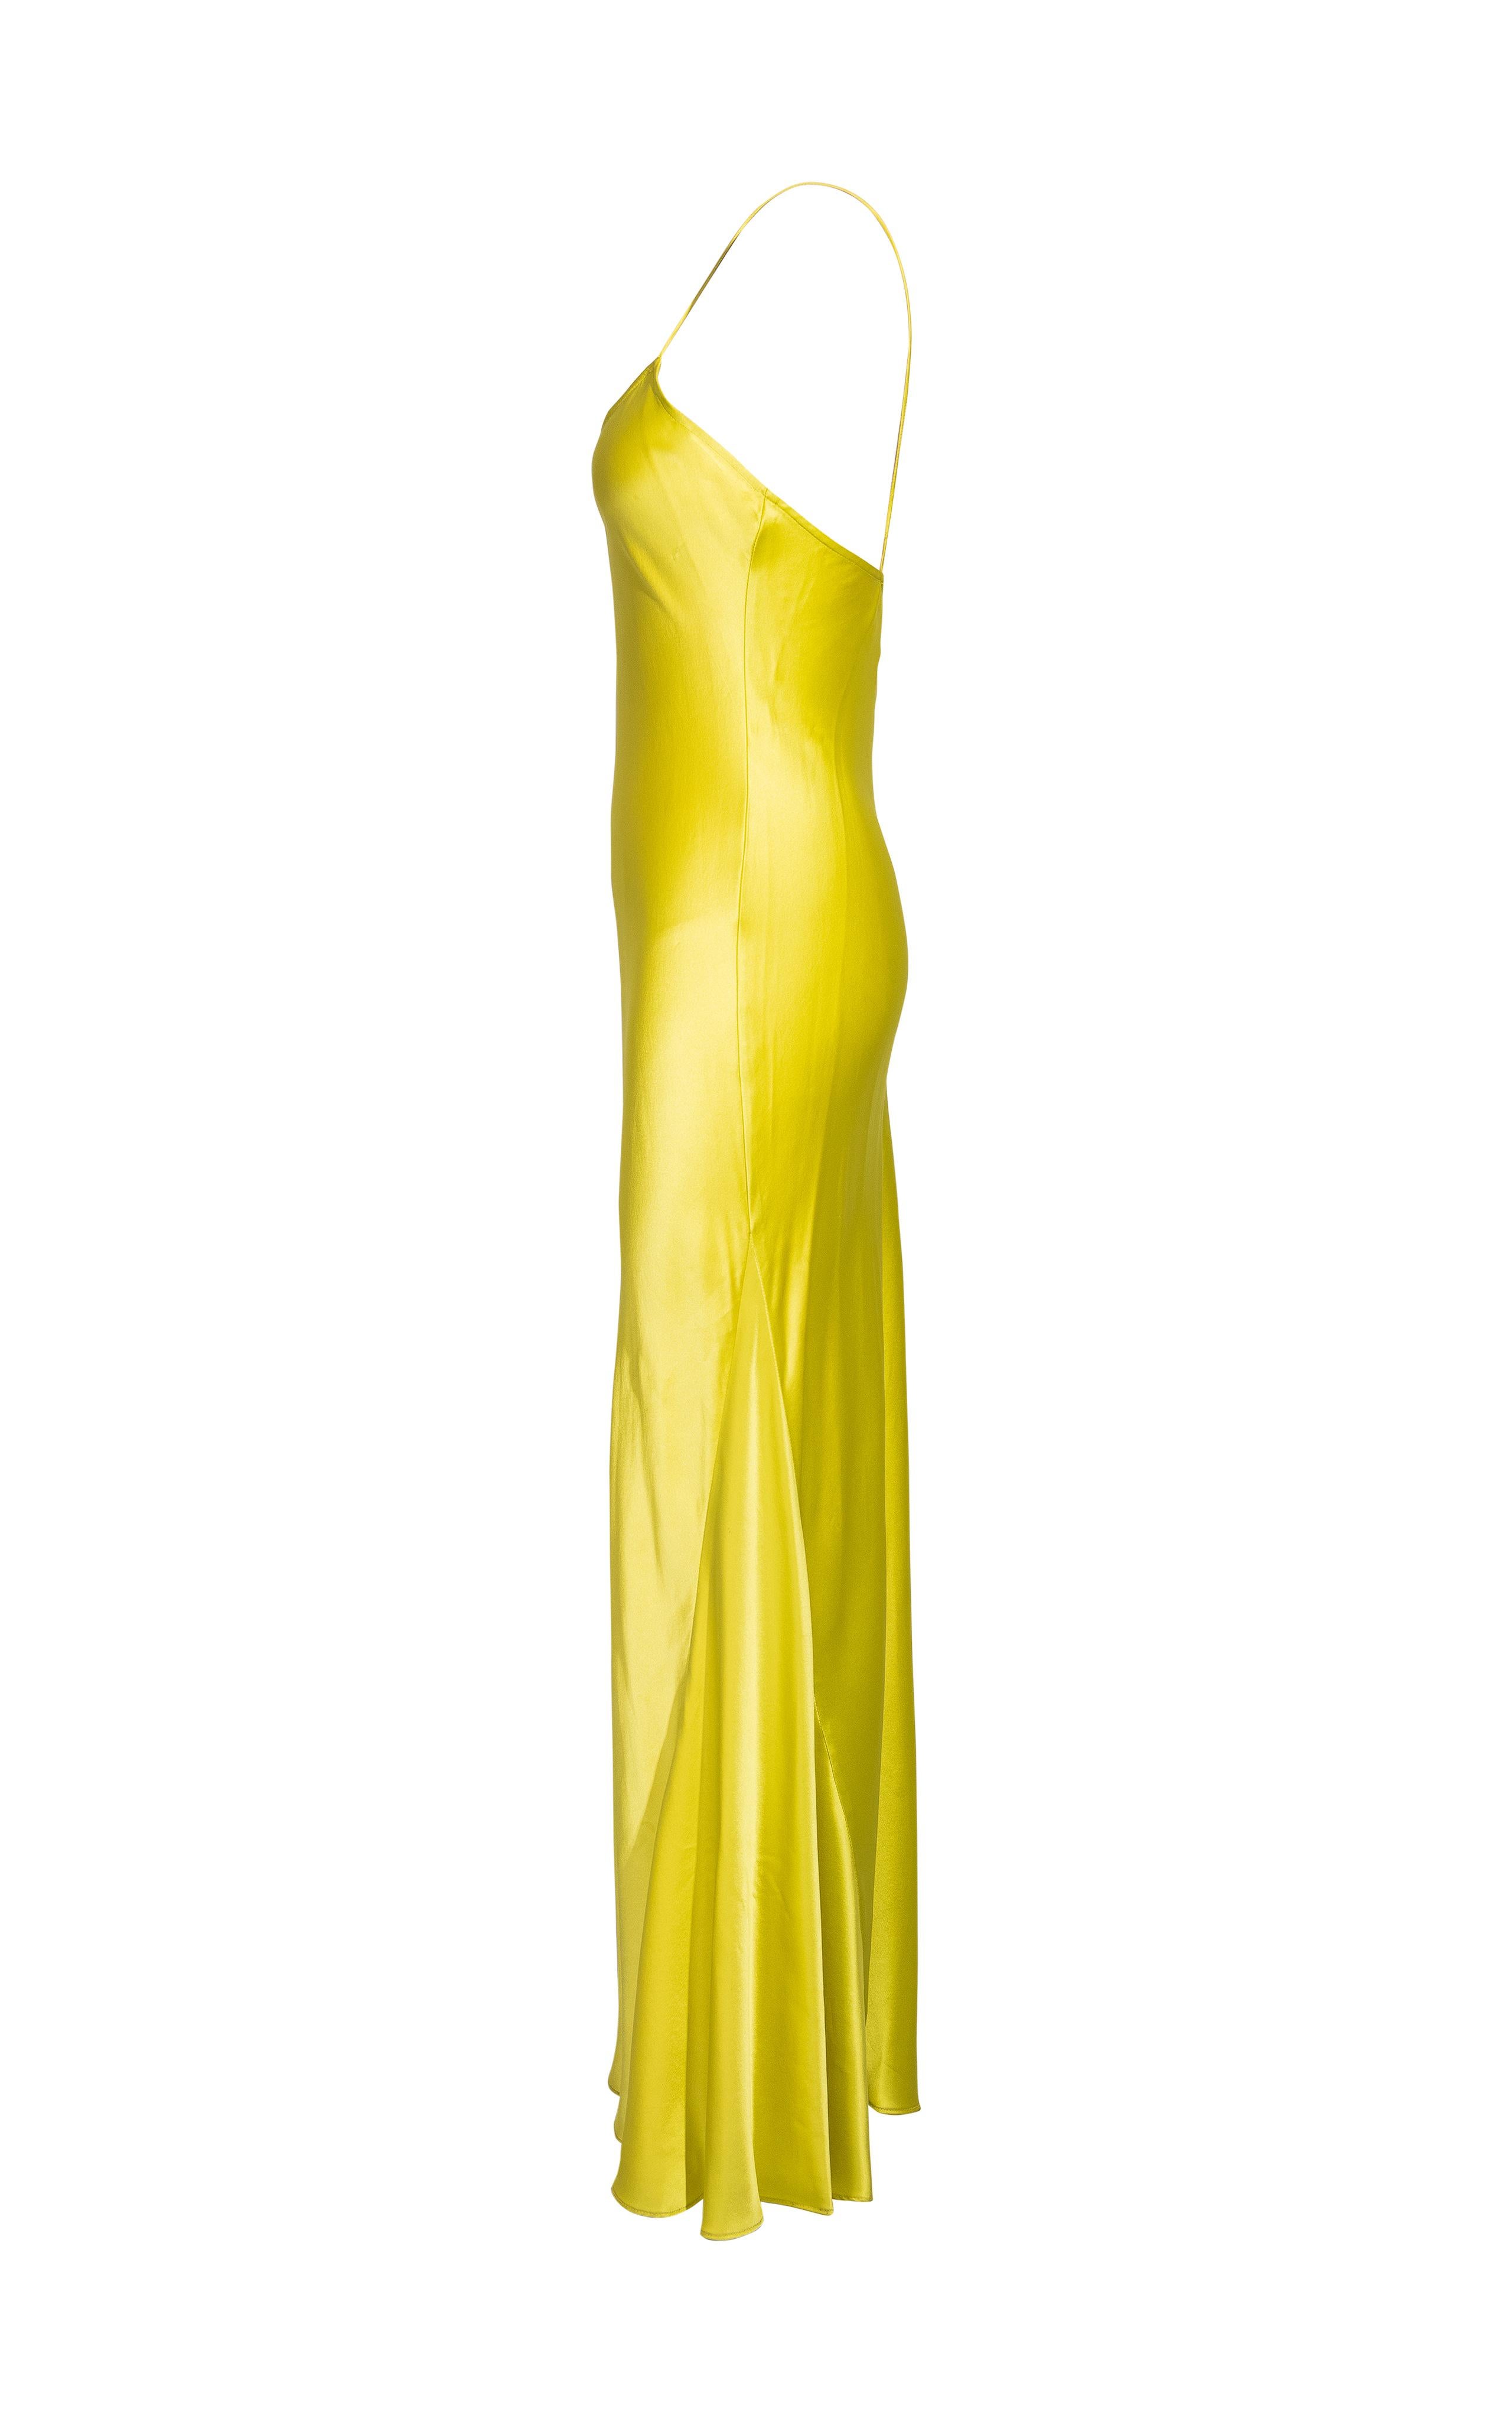 S/S 2005 Stephen Burrows Abstract Print Gown with Ruffle Details 2